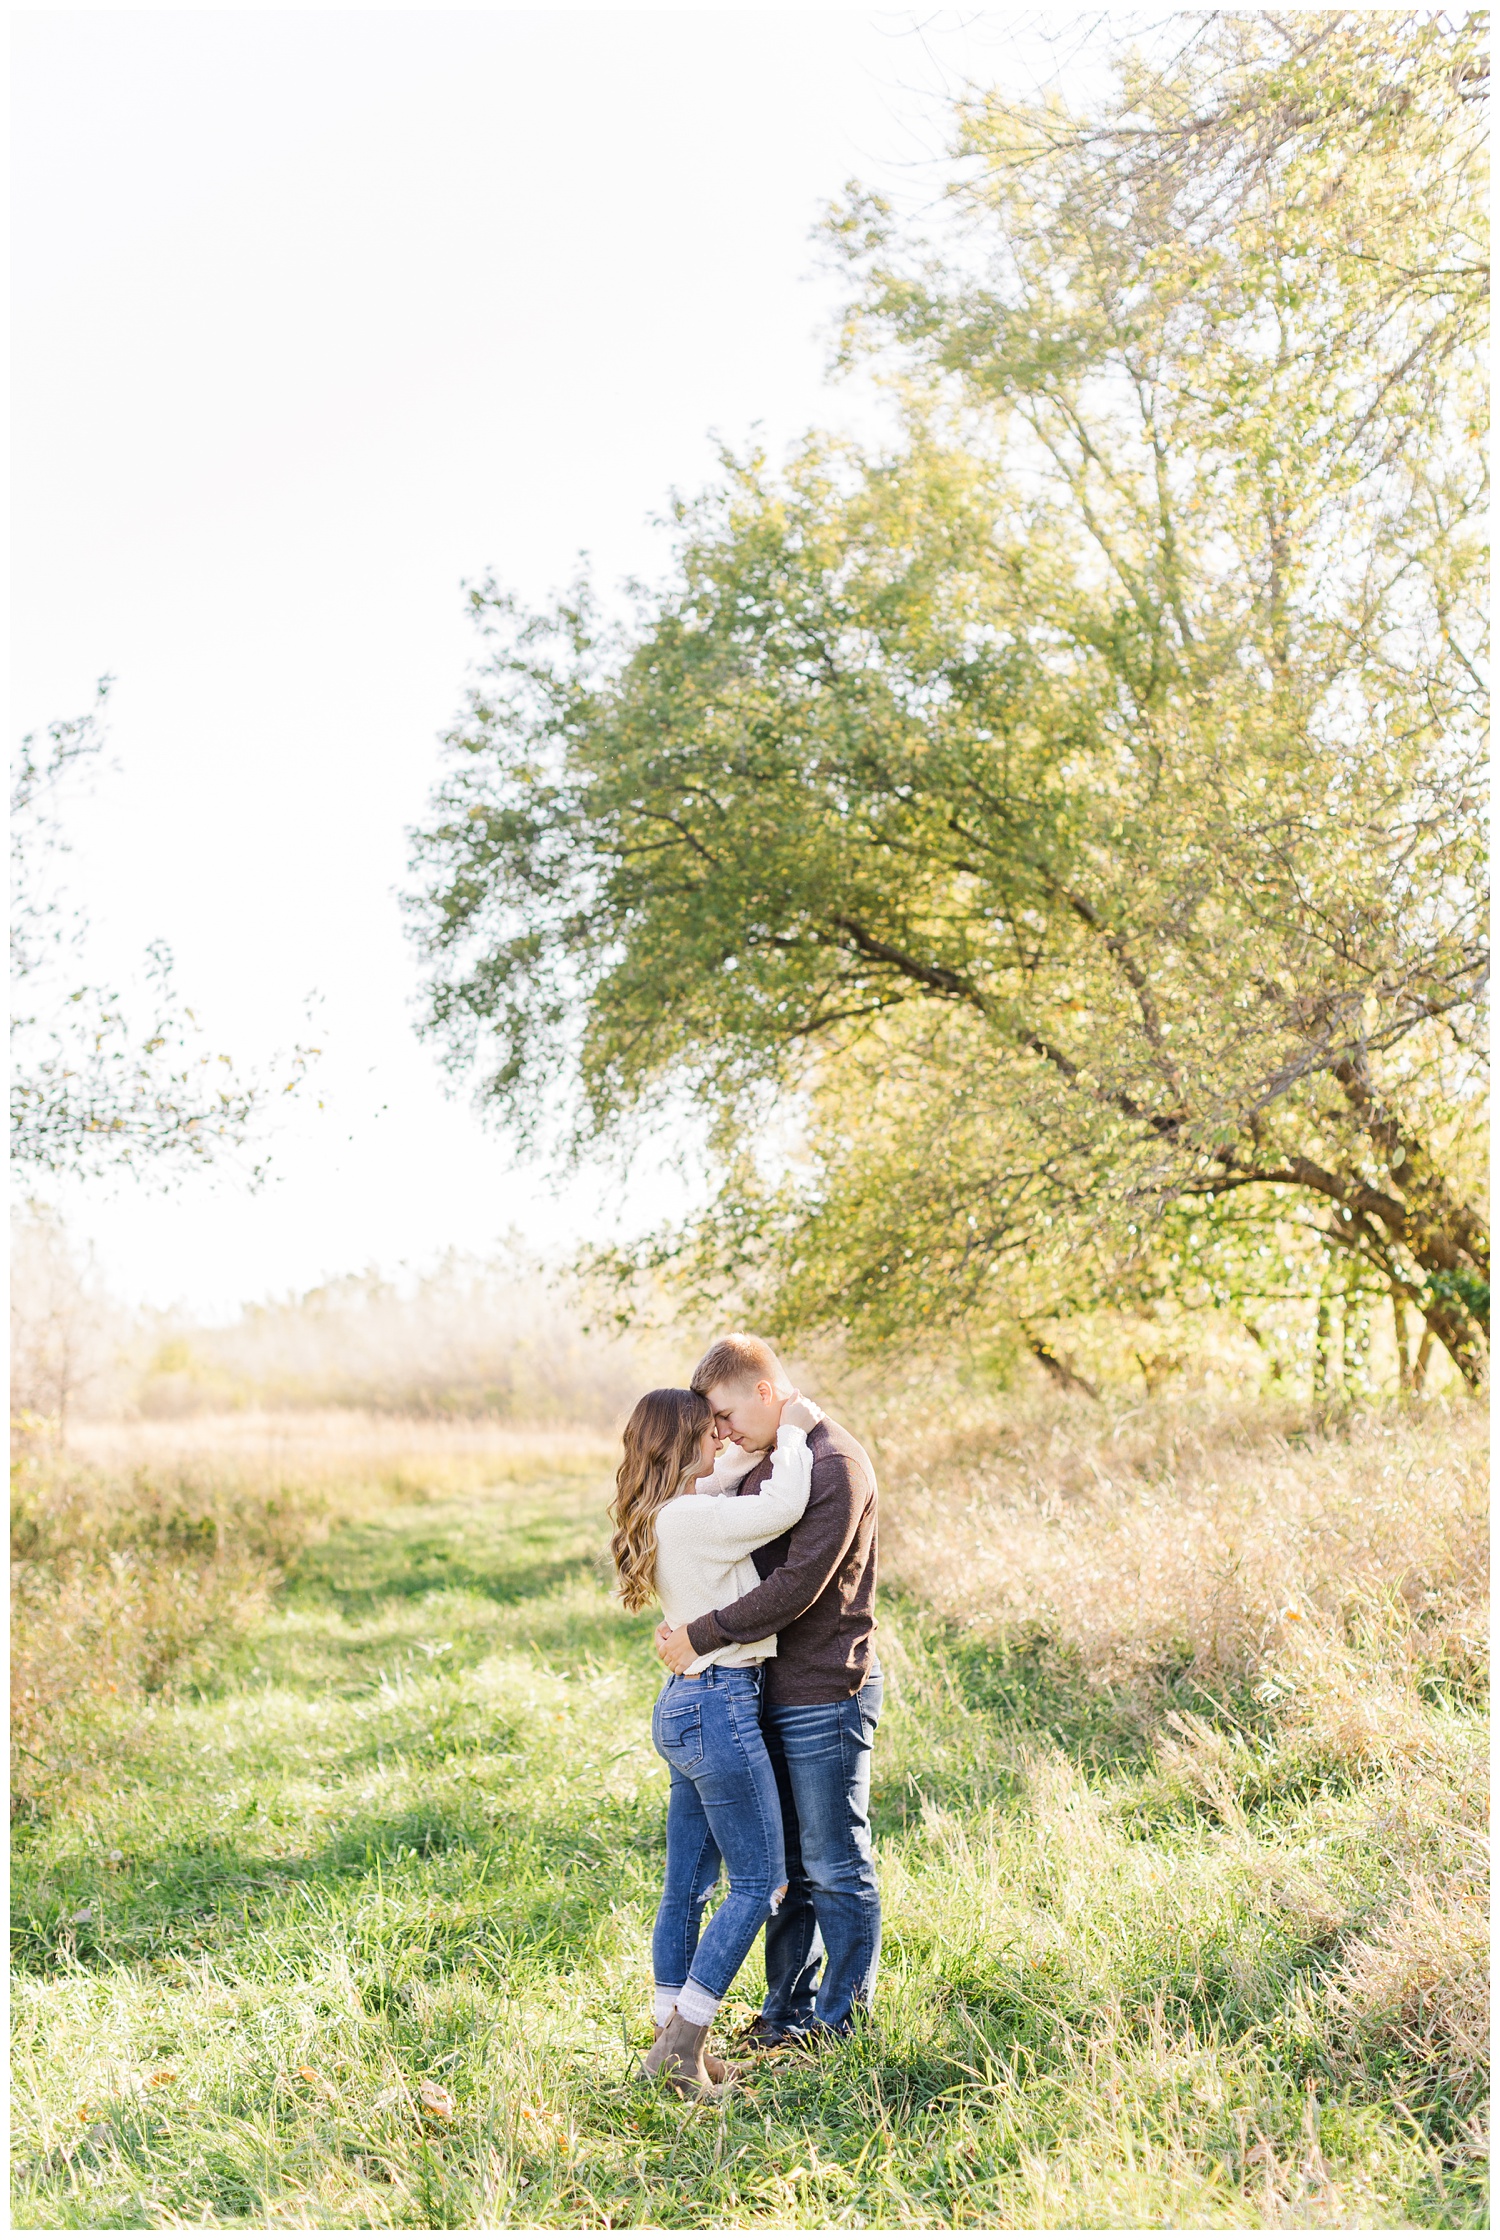 Thad and Ashlyn embrace in a grassy pasture | CB Studio